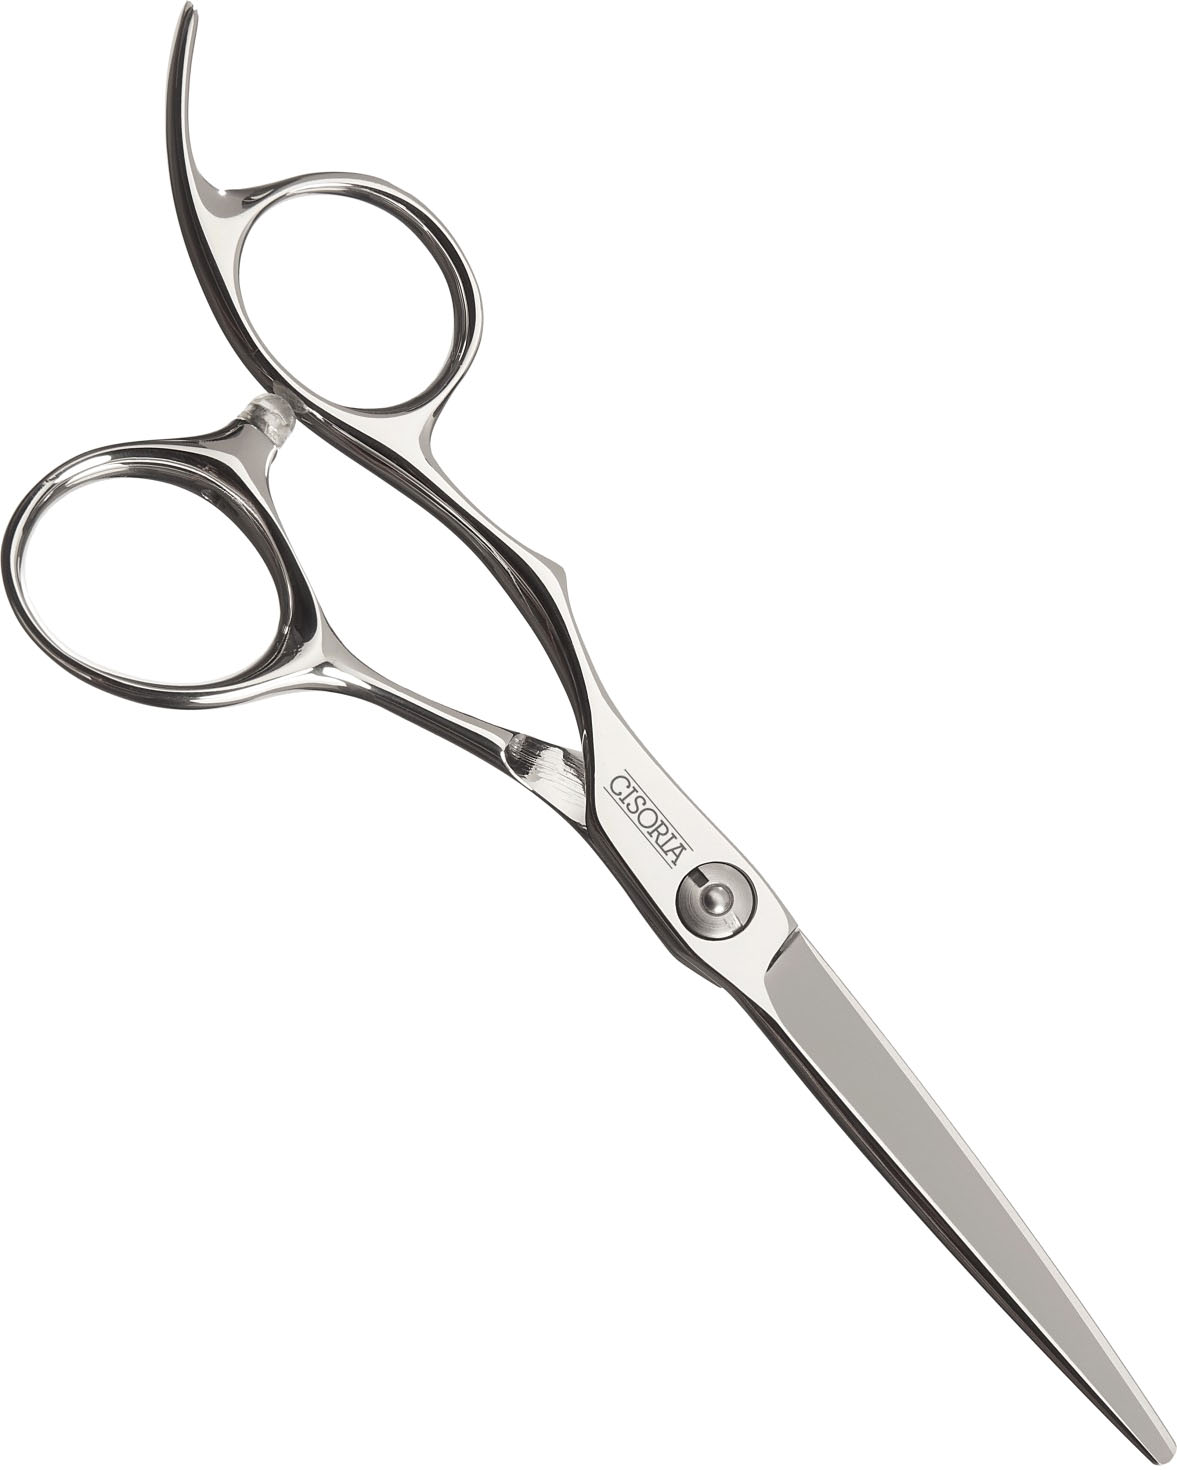  Cisoria Offset Cutting Scissors 5,5"L Series O by Sibel 